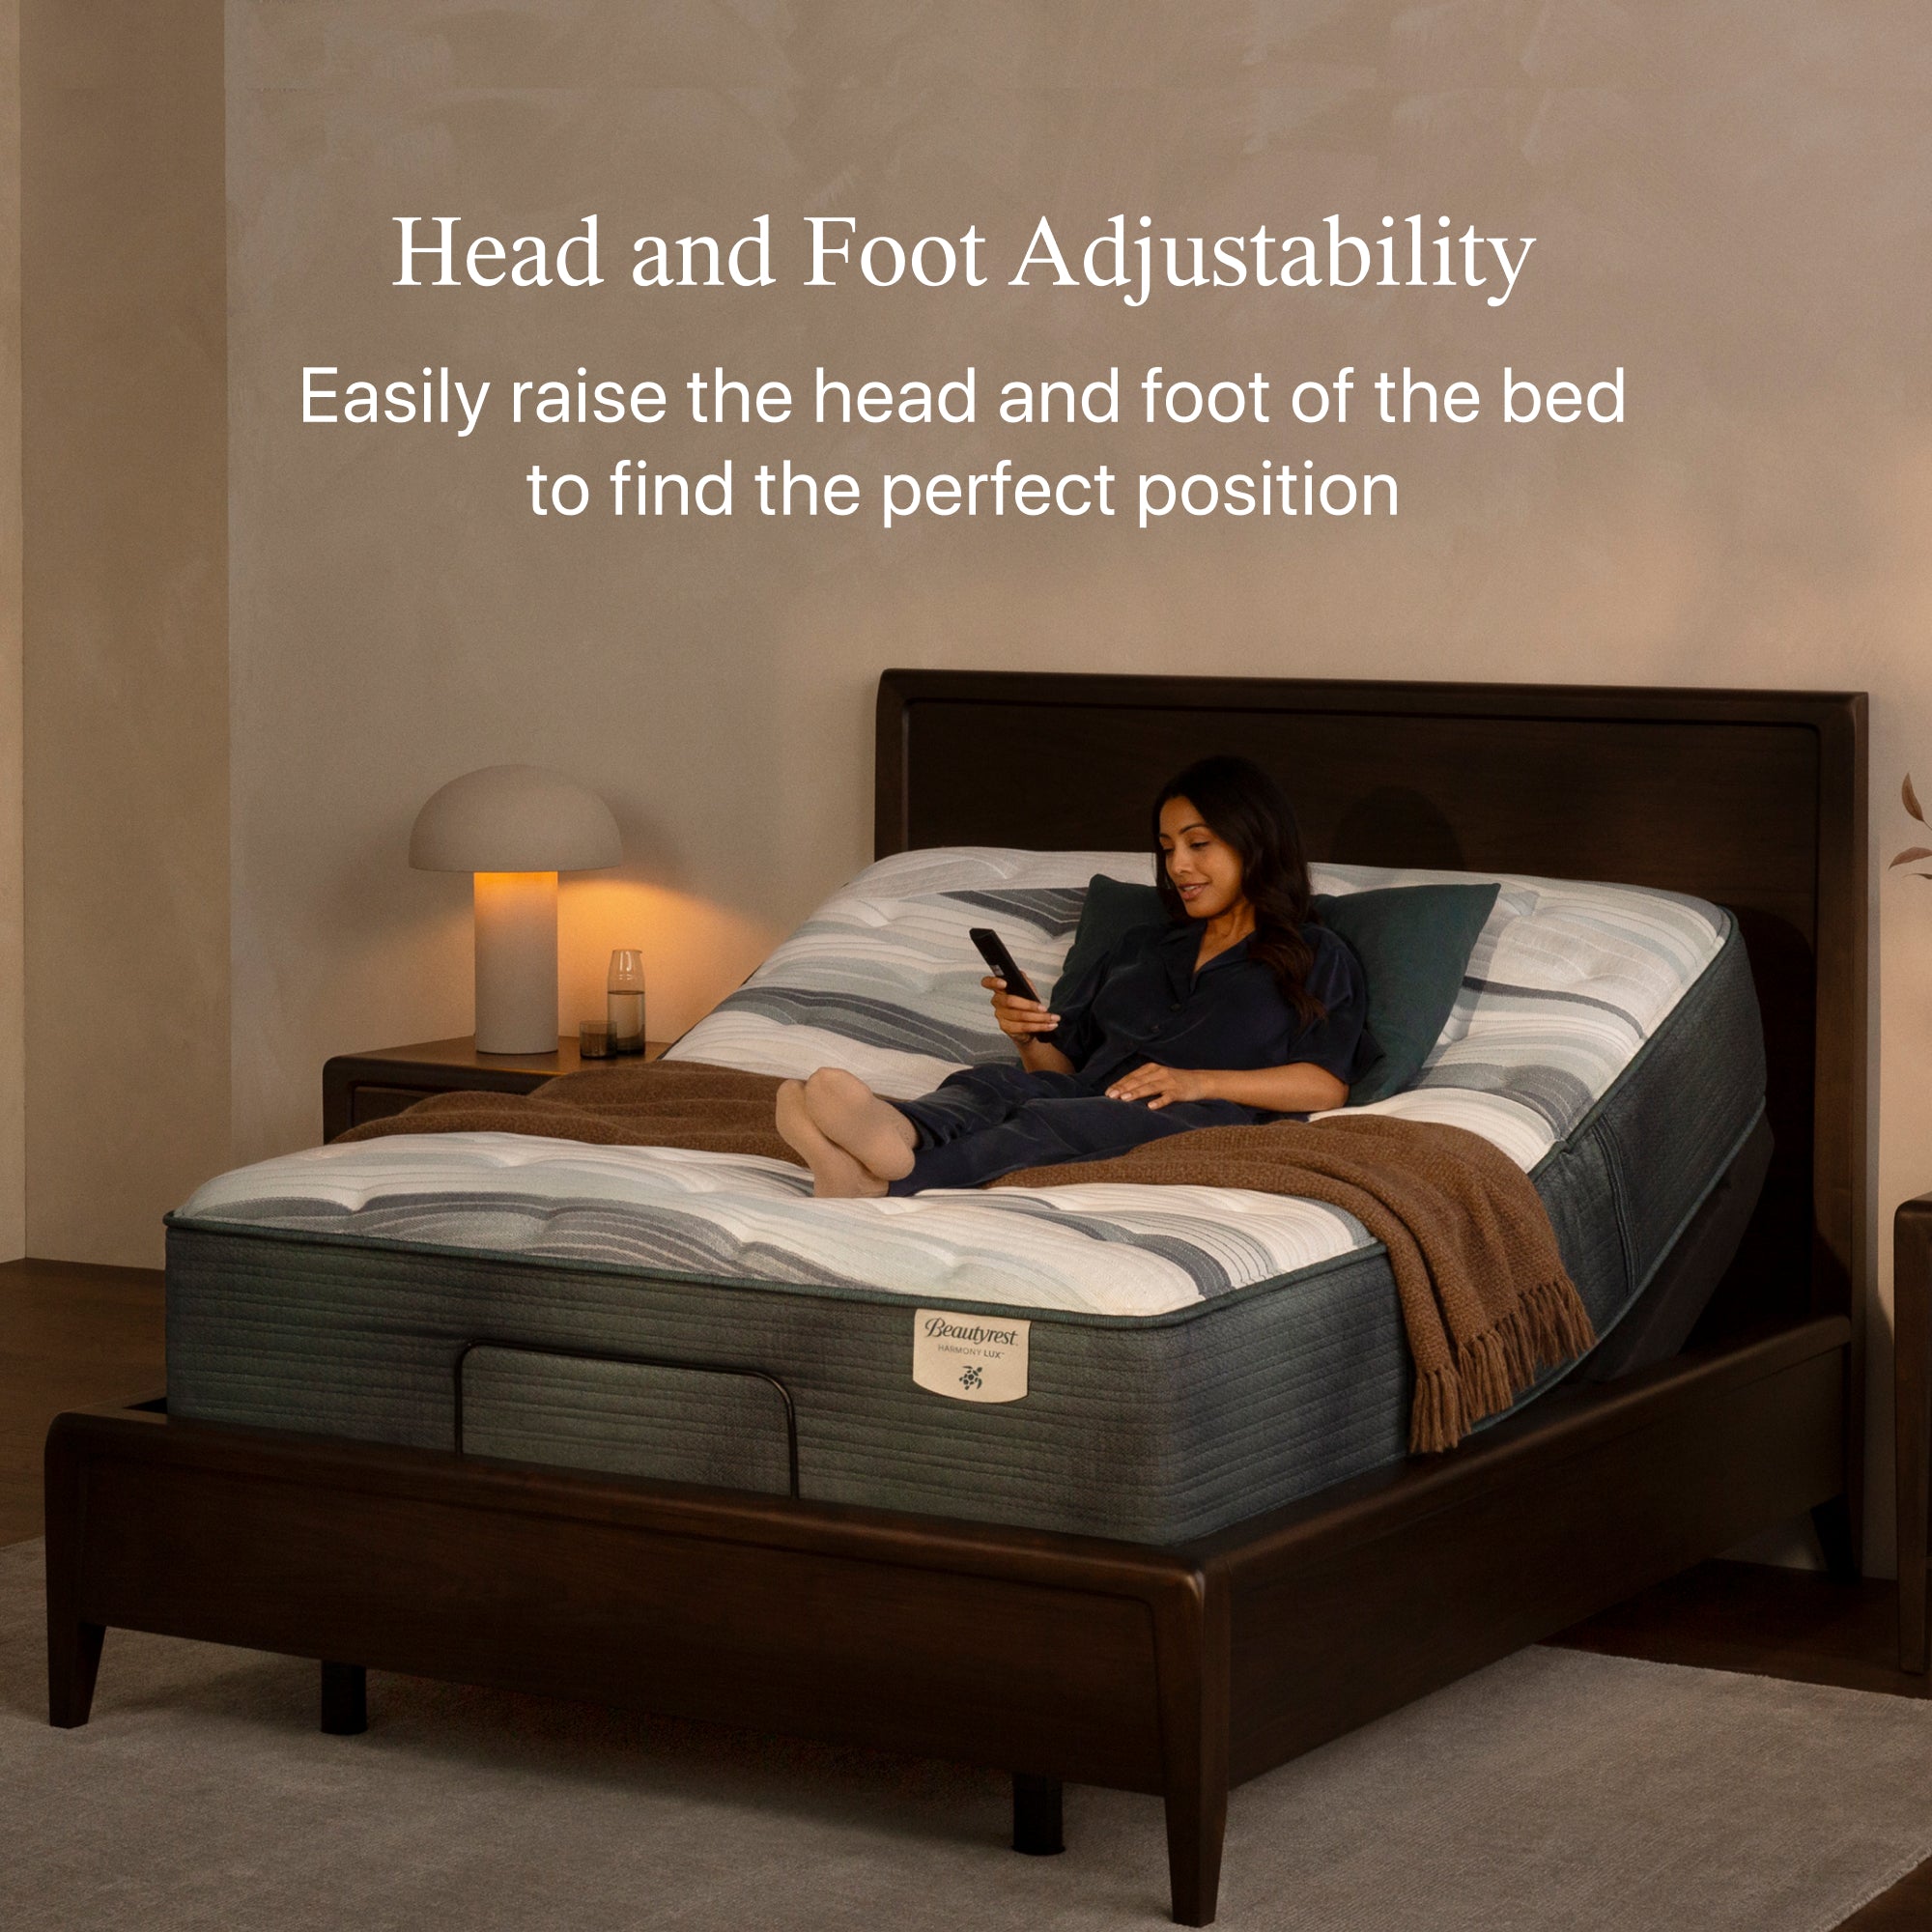 Woman laying on a mattress holding an adjustable base remote.  The mattress is slightly elevated  within the adjustable base and both are in a brown bed frame.   Headline at the top of the image states Head and Foot Adjustability  Easily raise the head and foot of the bed to find the perfect position